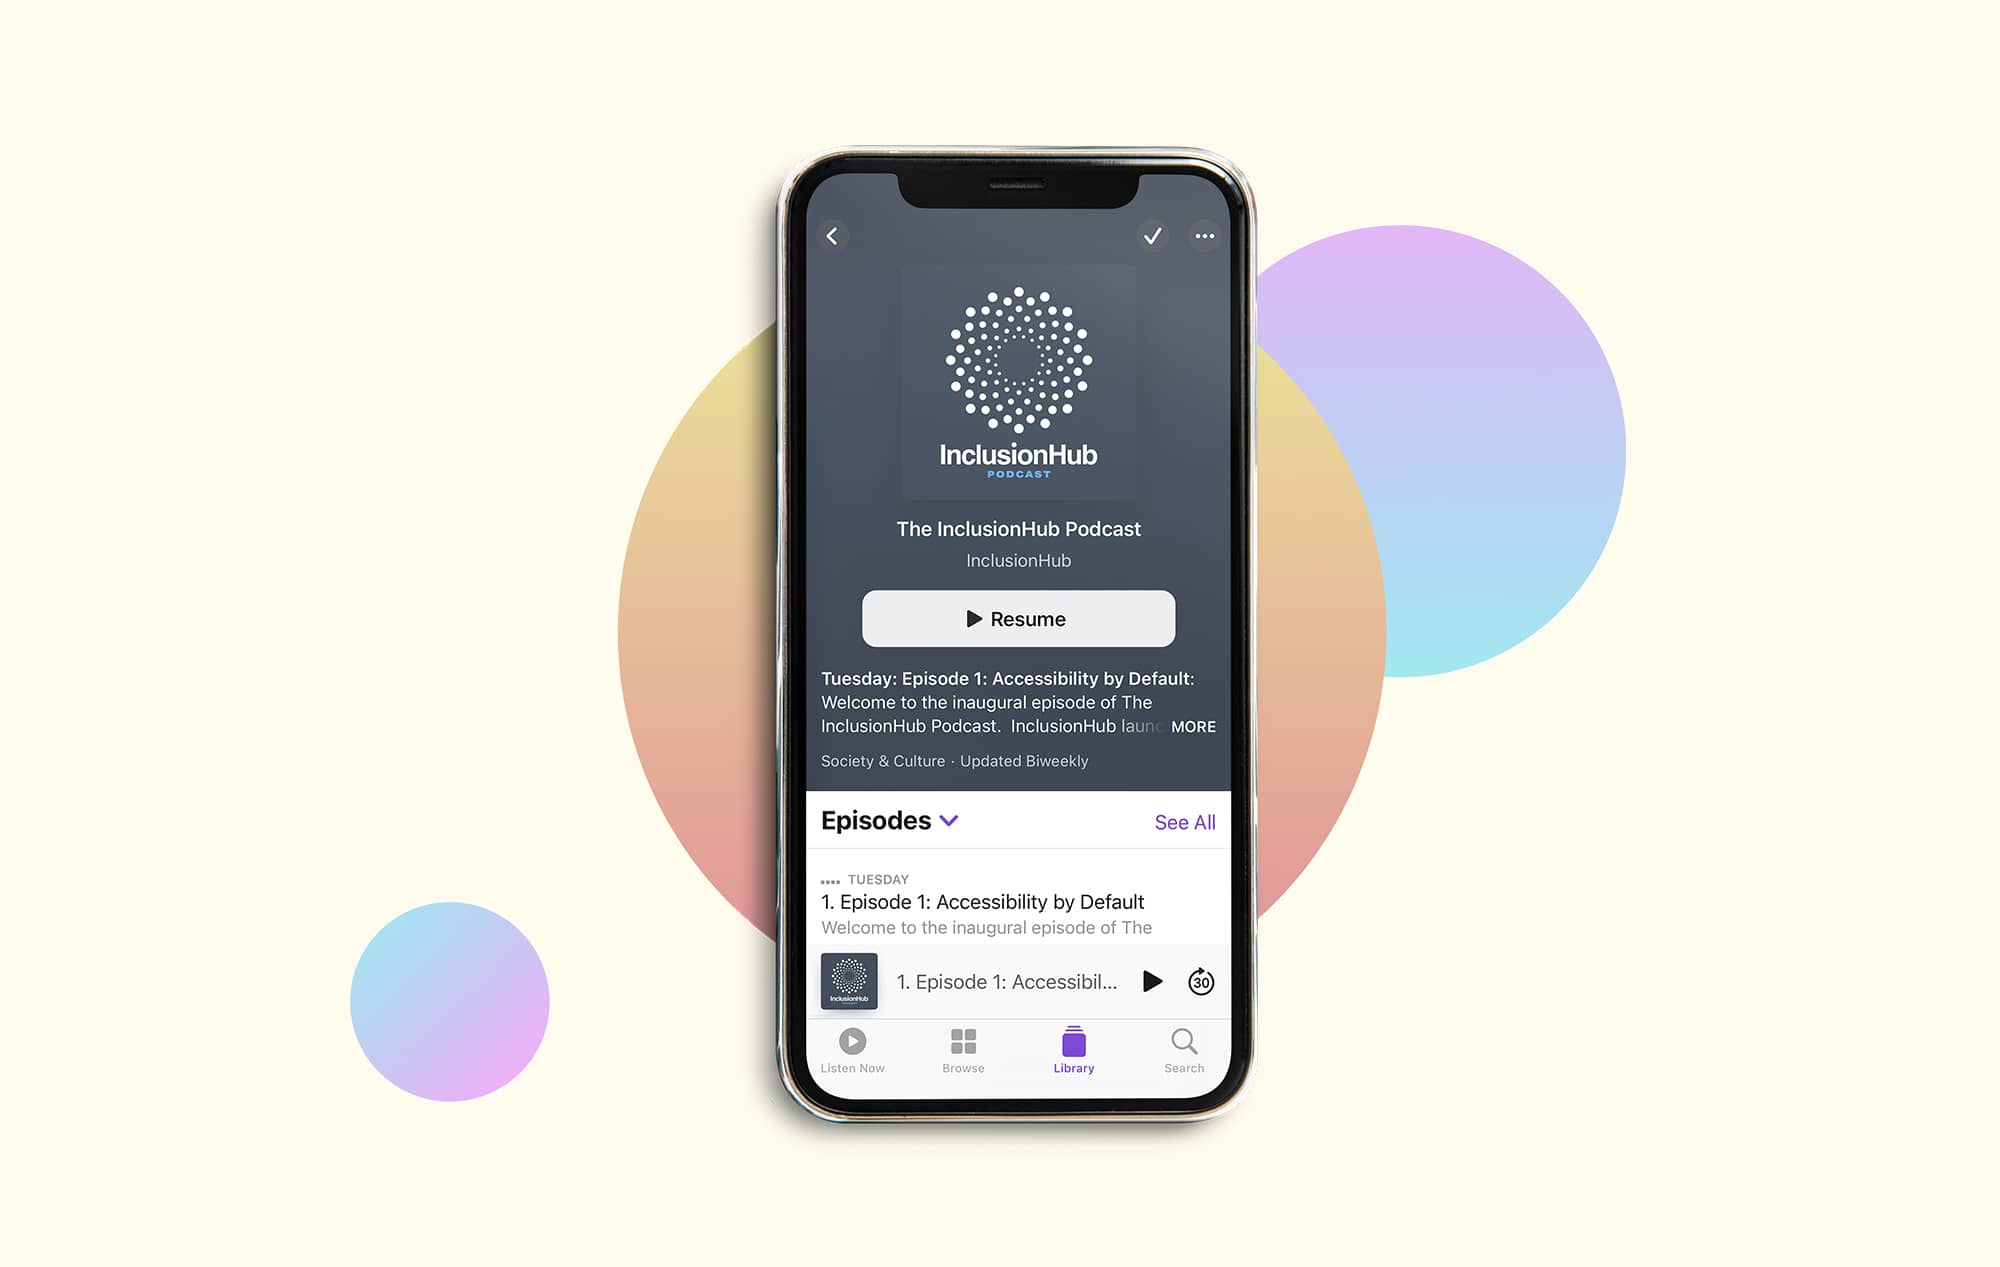 An iPhone open to the InclusionHub Podcast in Apple Podcasts. The episode featured is Episode 1 Accessibility By Design.